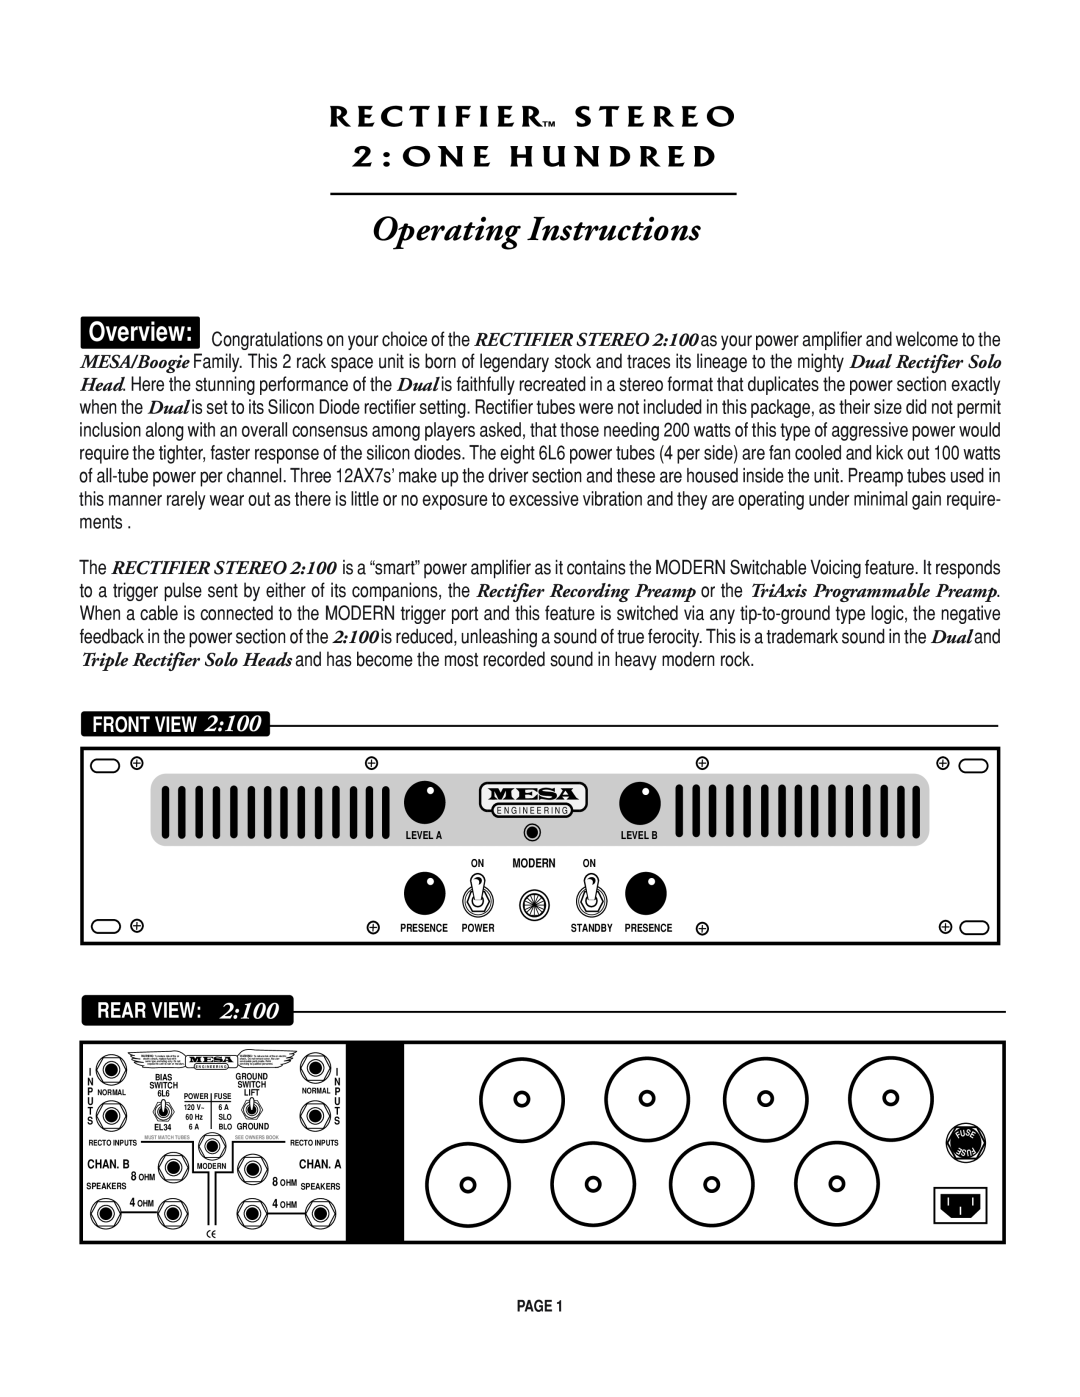 Mesa/Boogie Rectifier Stereo owner manual Front View, Operating Instructions, Rear View 